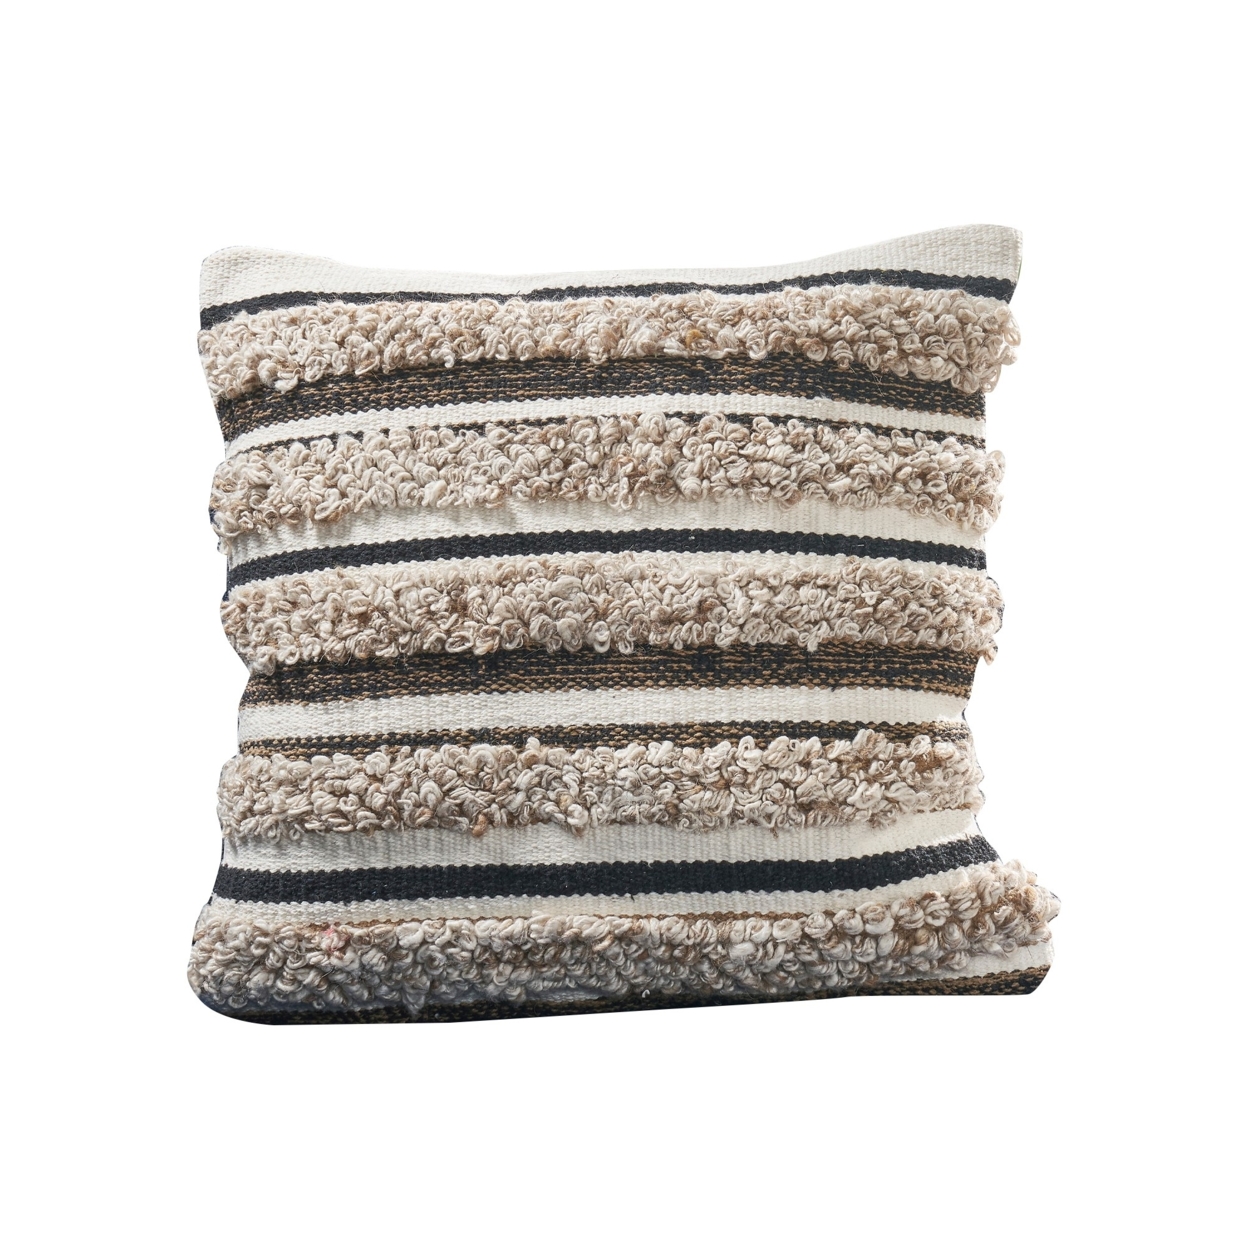 Veria Pillow Cover With Stripes And Shaggy Texture The Urban Port, Multicolor- Saltoro Sherpi